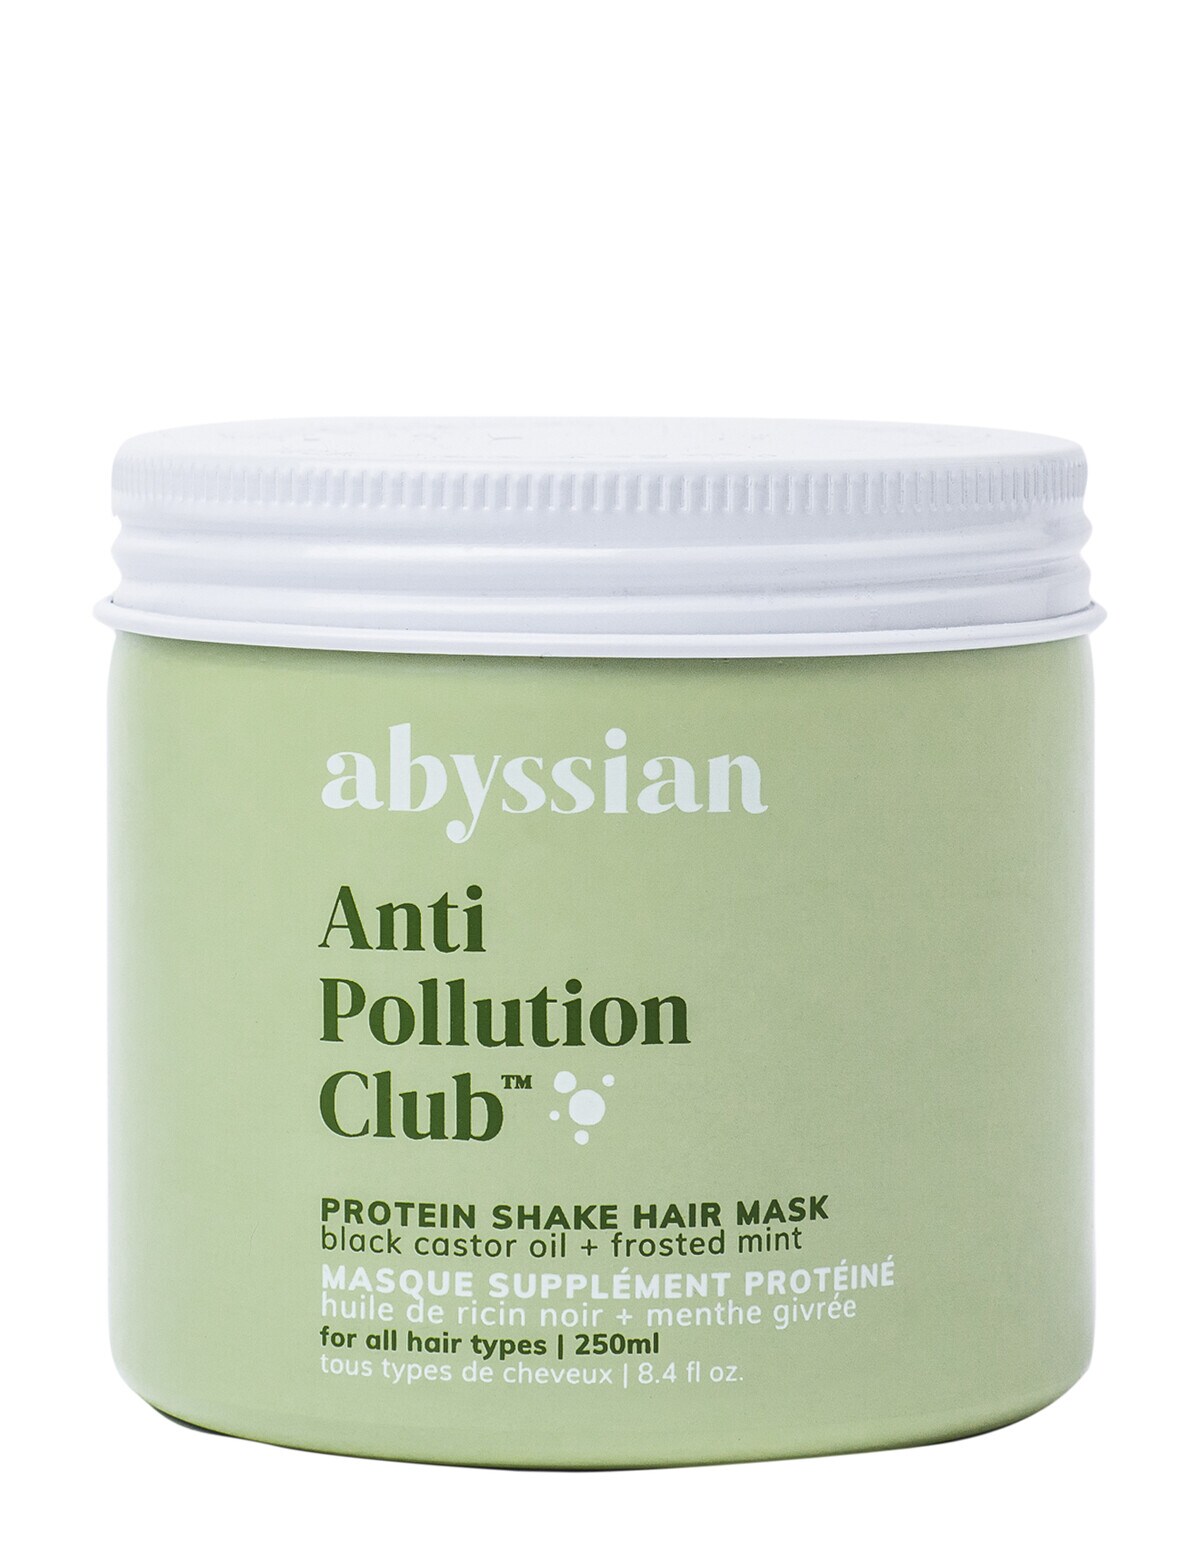 abyssian Anti Pollution Protein Shake Hair Mask, 250ml - Hair Care & Brushes